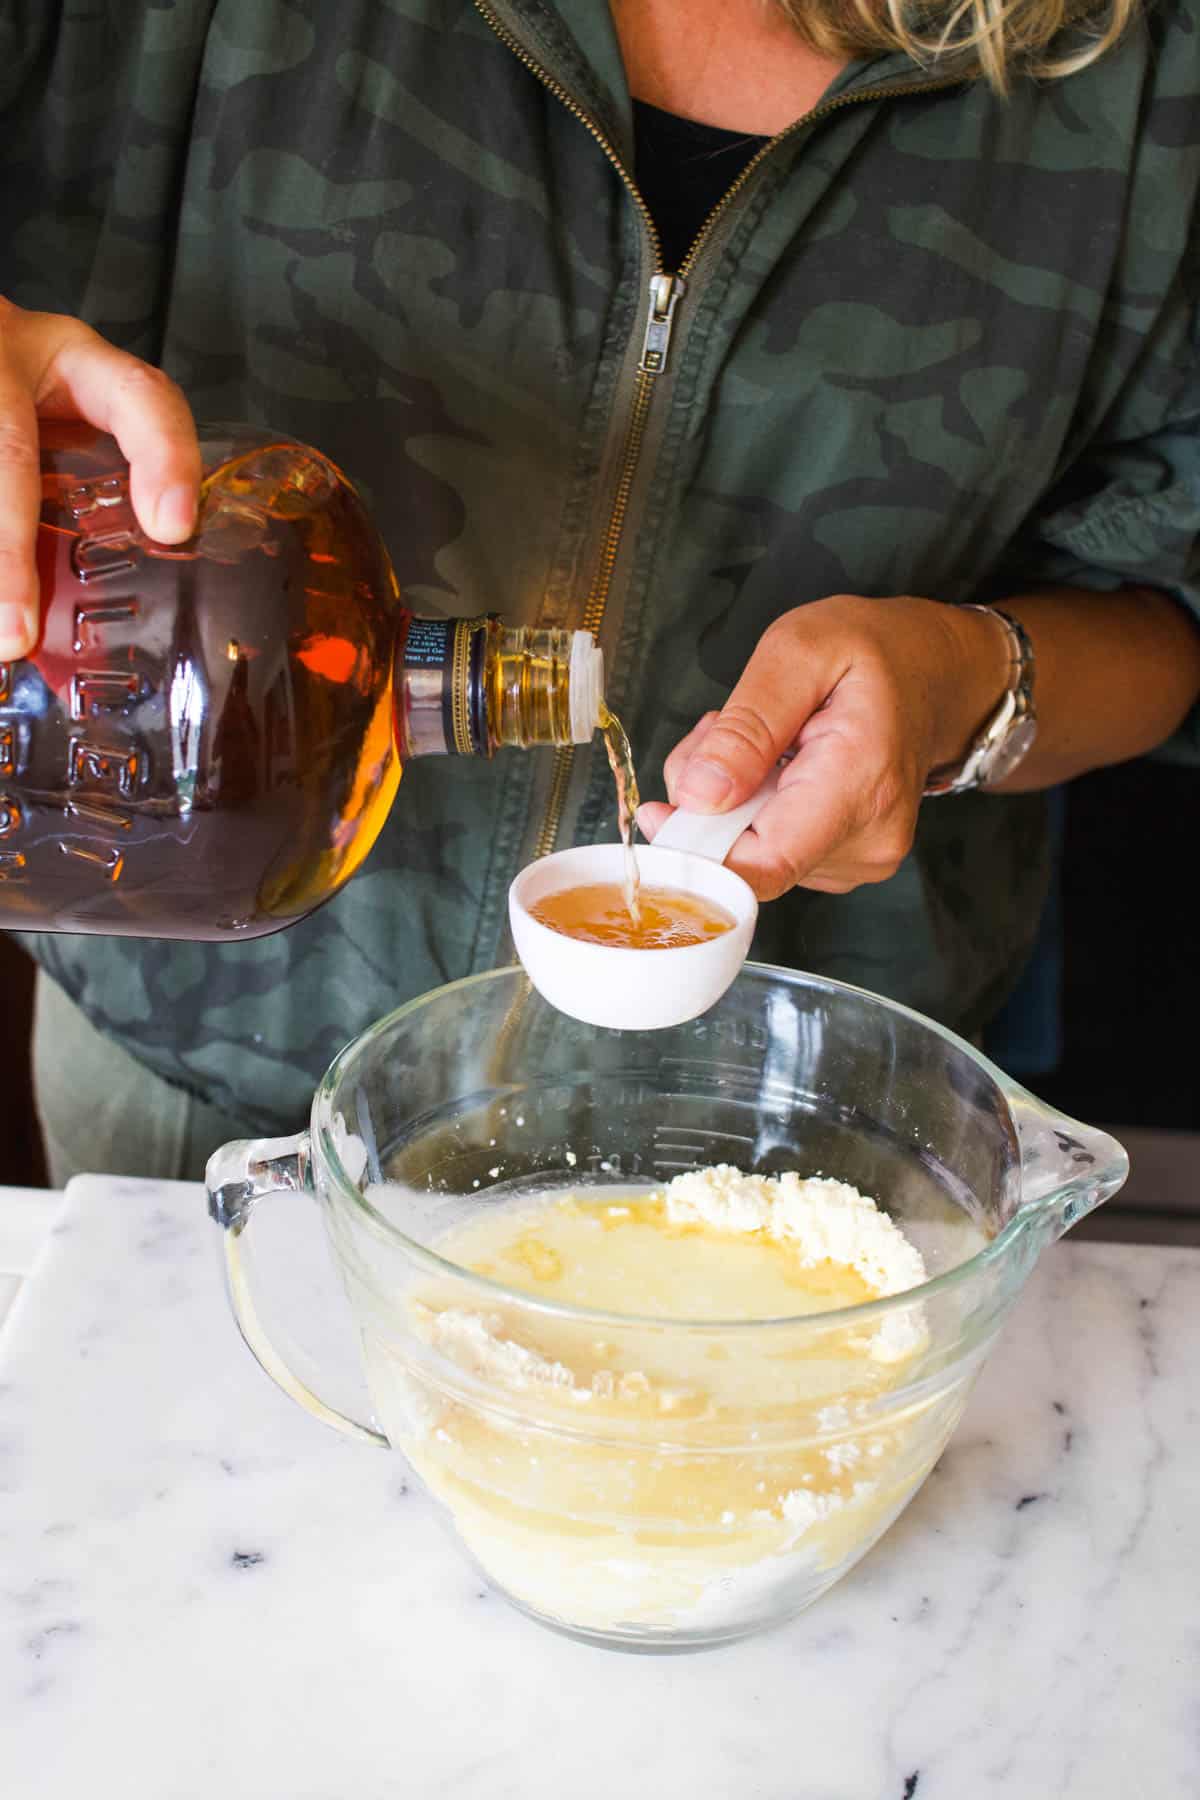 A woman pouring bourbon into a measuring cup above a batter bowl.